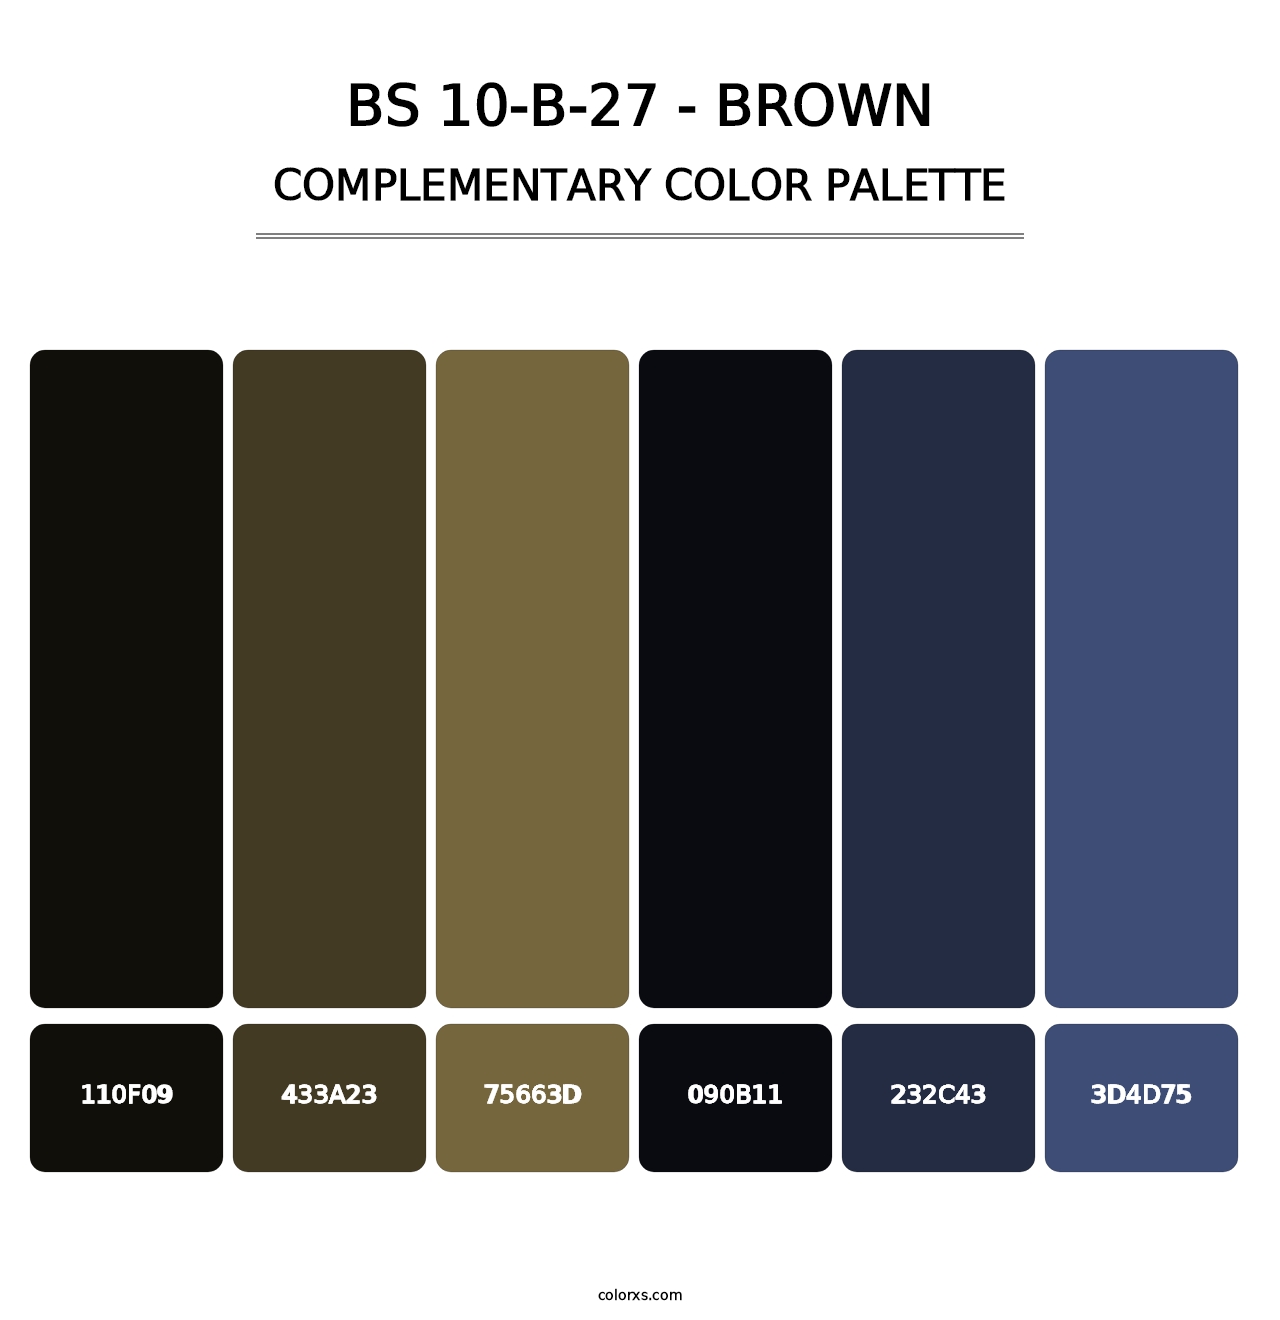 BS 10-B-27 - Brown - Complementary Color Palette